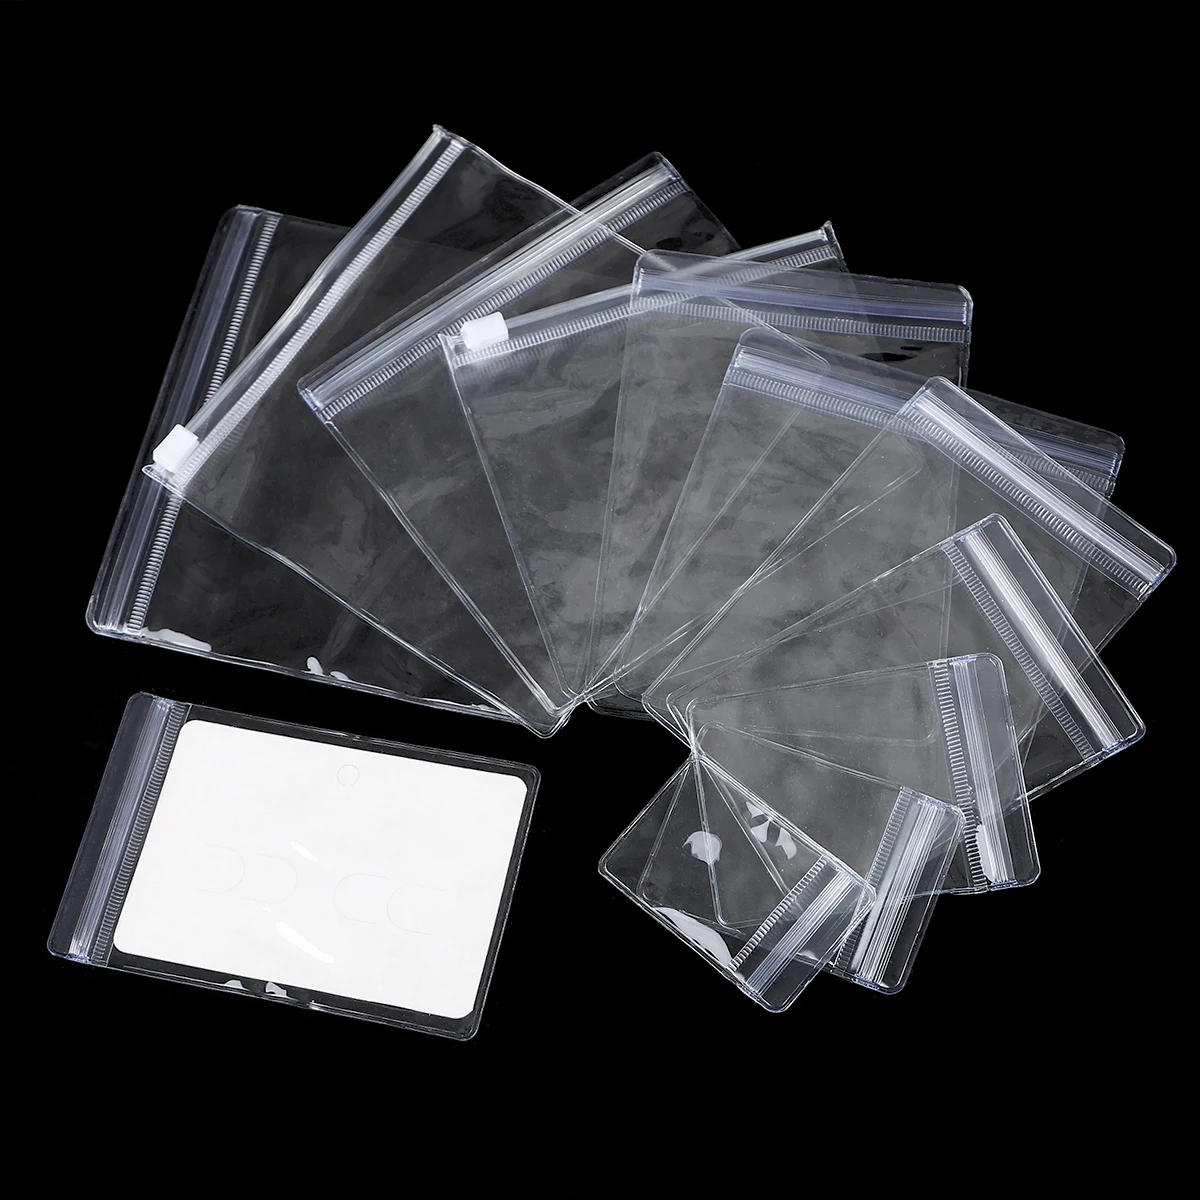 Dropship Zip Bags 5 X 8; Pack Of 100 Clear Plastic Jewelry Bags